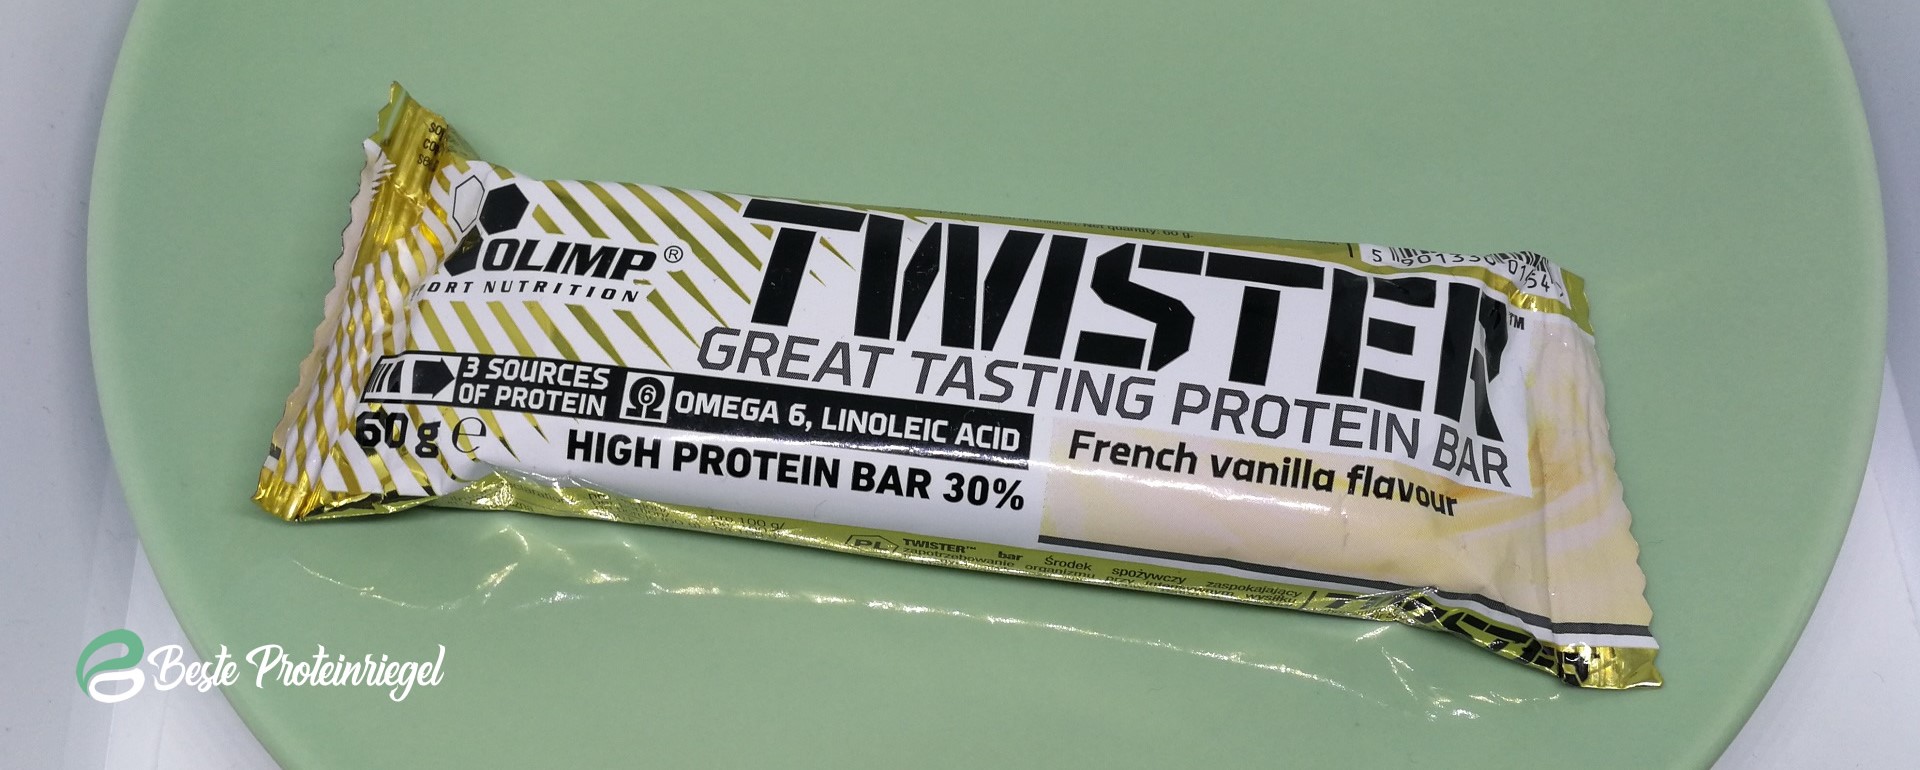 Olimp Twister Protein Riegel Verpackung